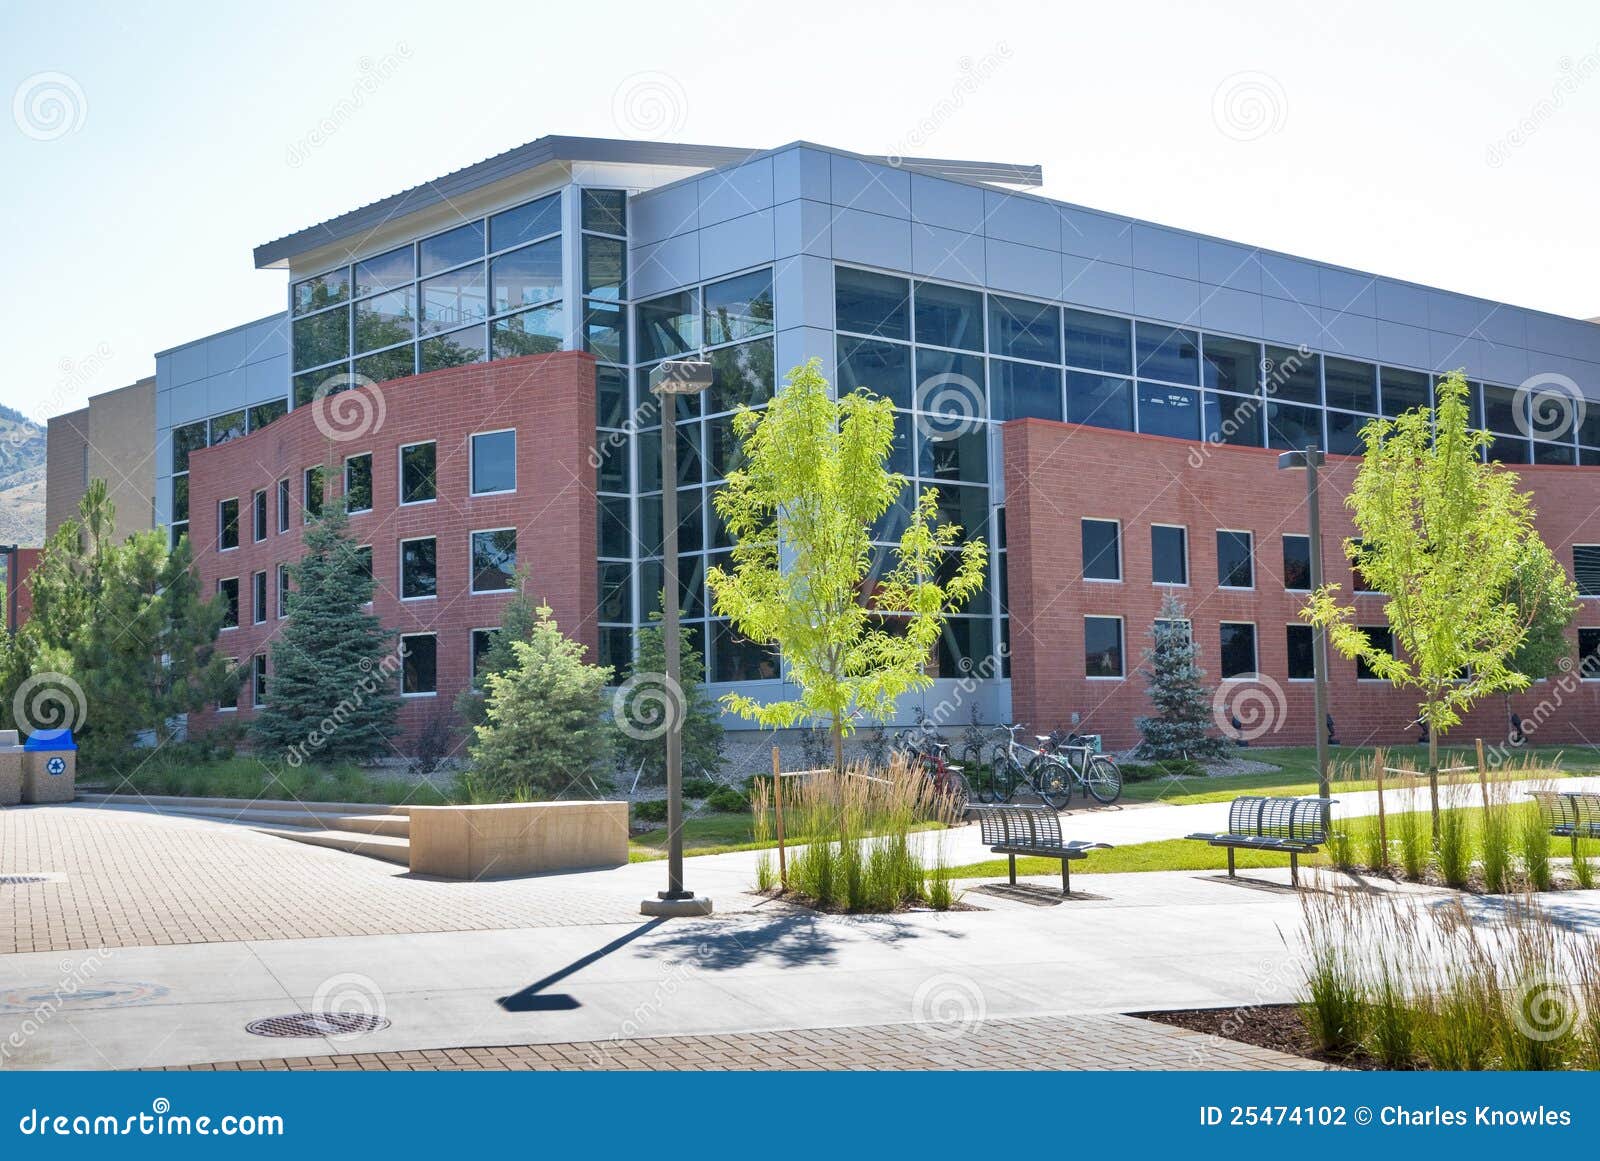 College School Building And Bikes Stock Photography - Image: 25474102